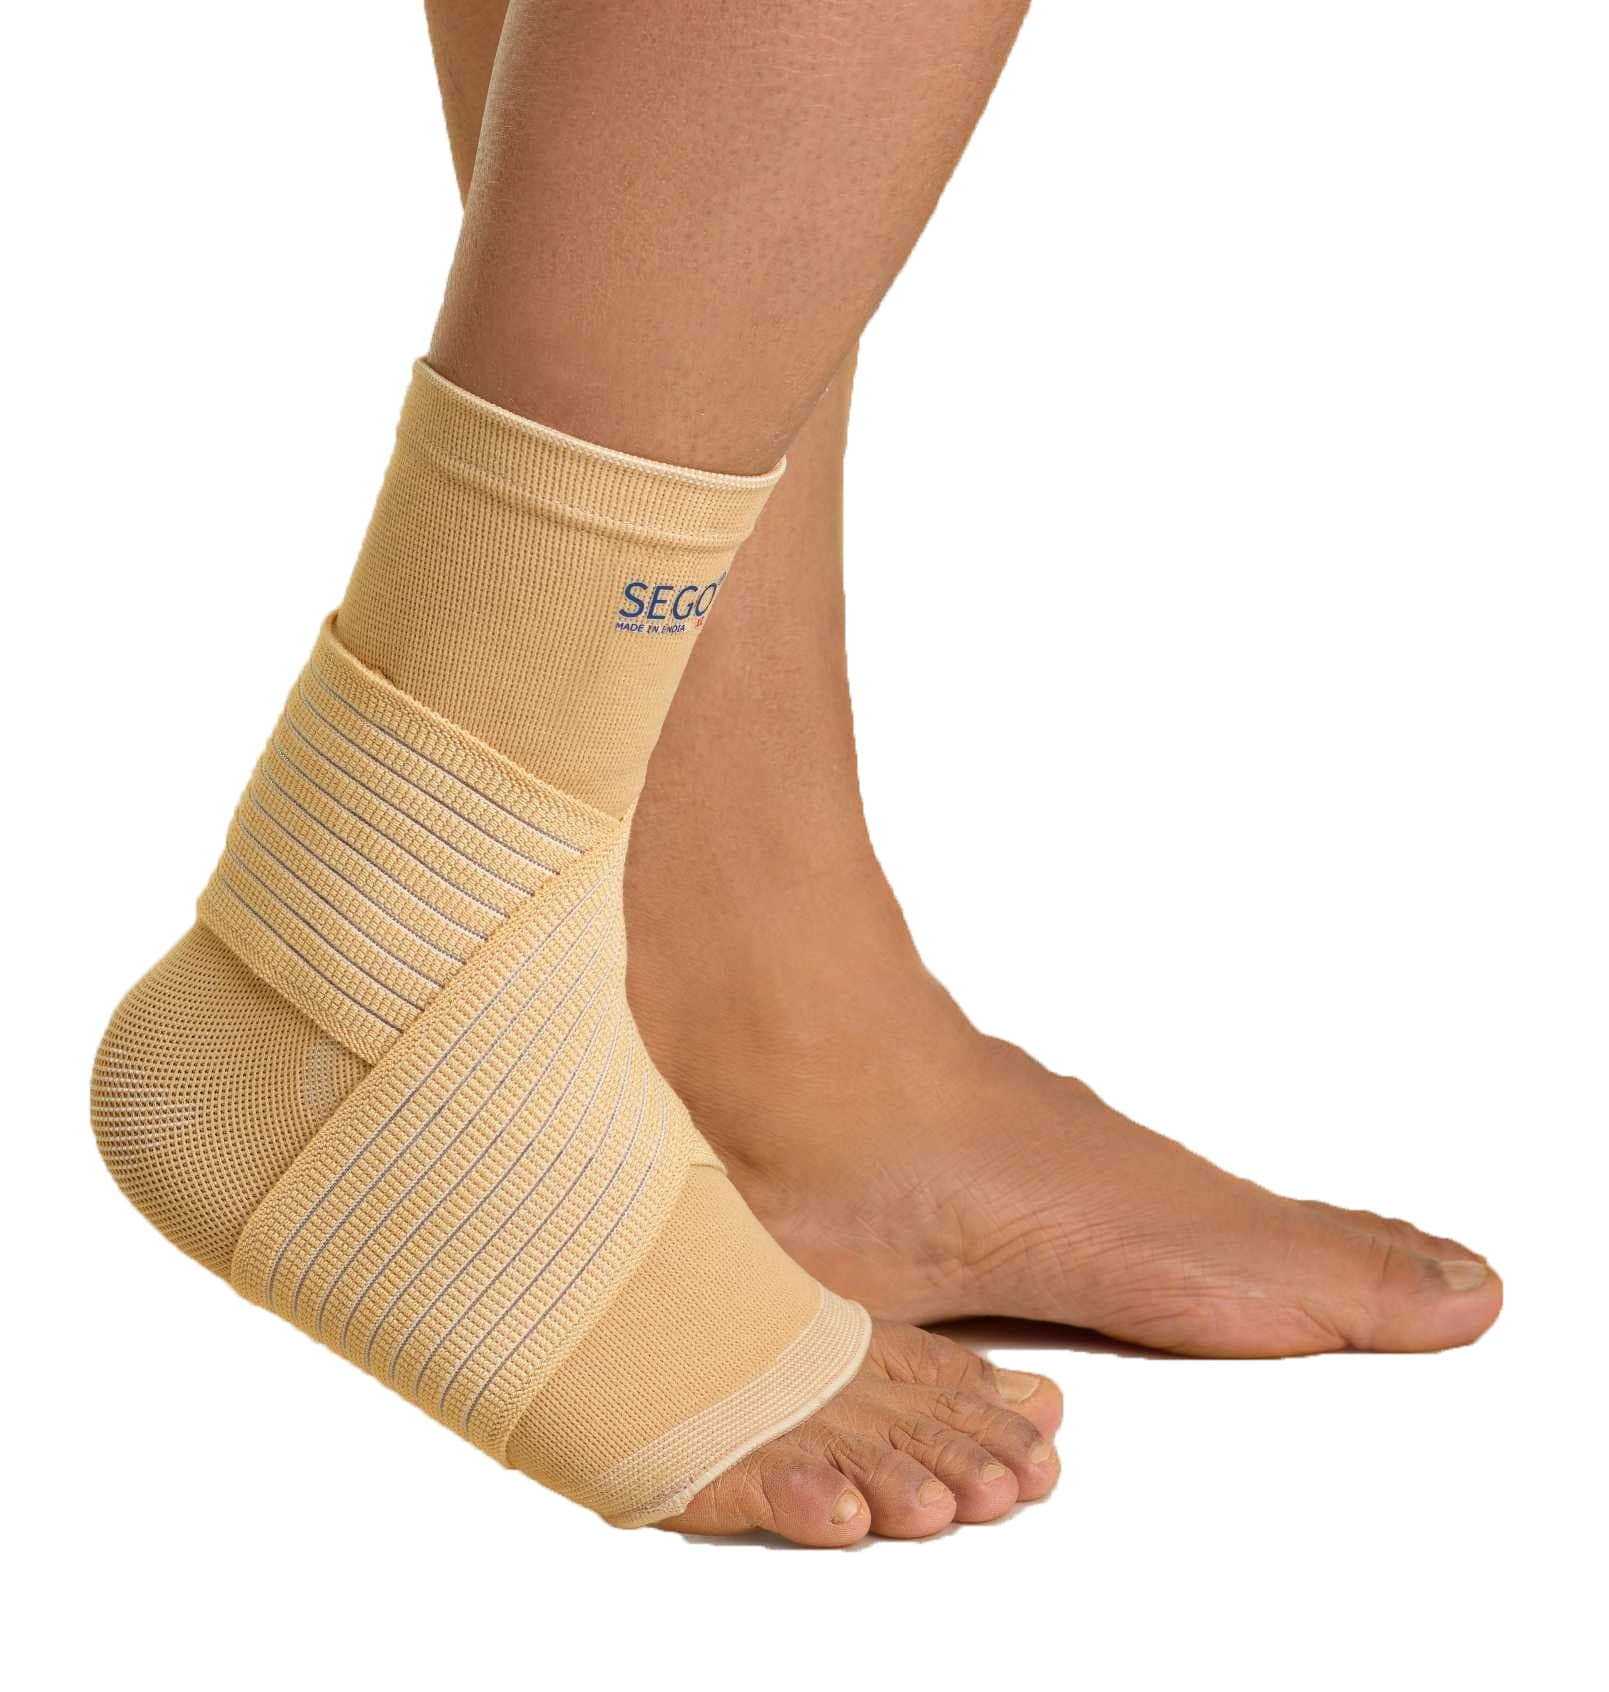 buy online 	Ankle Support Sego Breath - Dyna 24 - X-Large  Qatar Doha